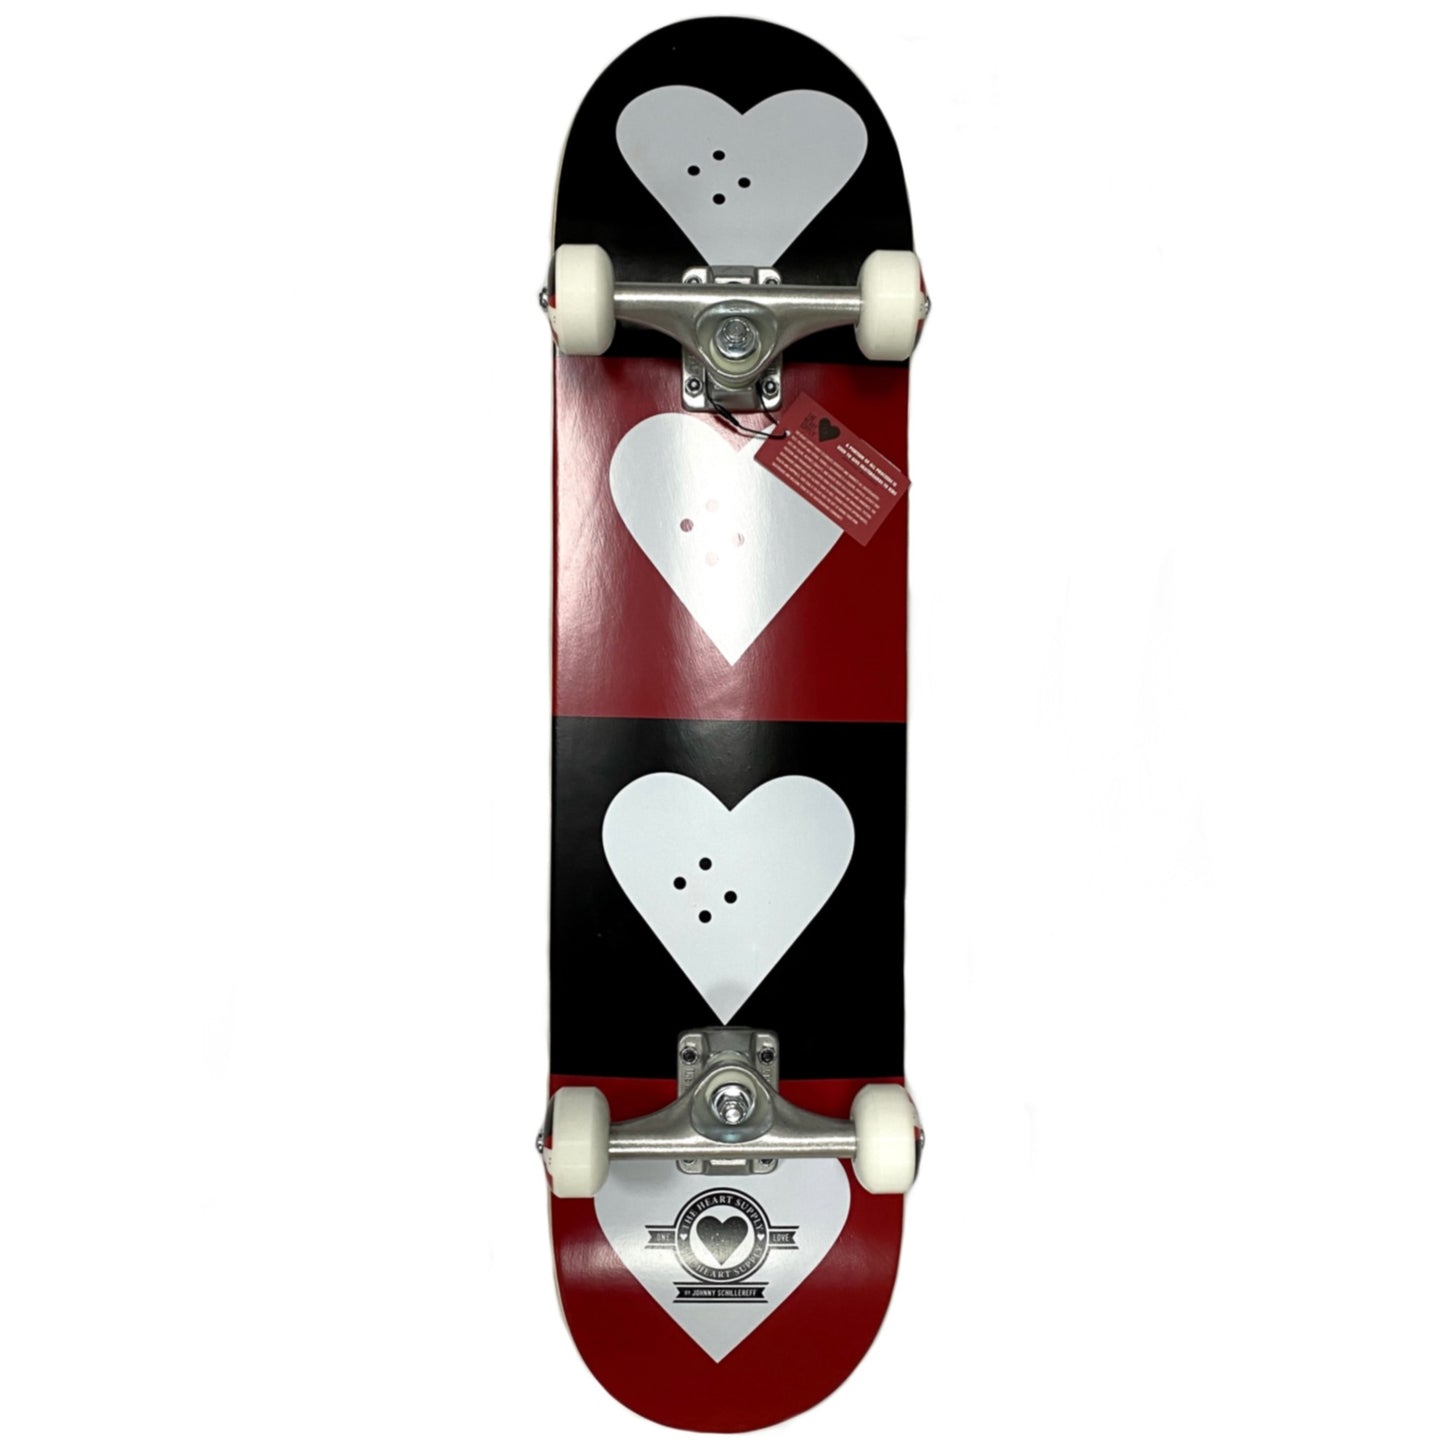 The Heart Supply Quad Logo Black & Red 7.75" Skateboard Complete